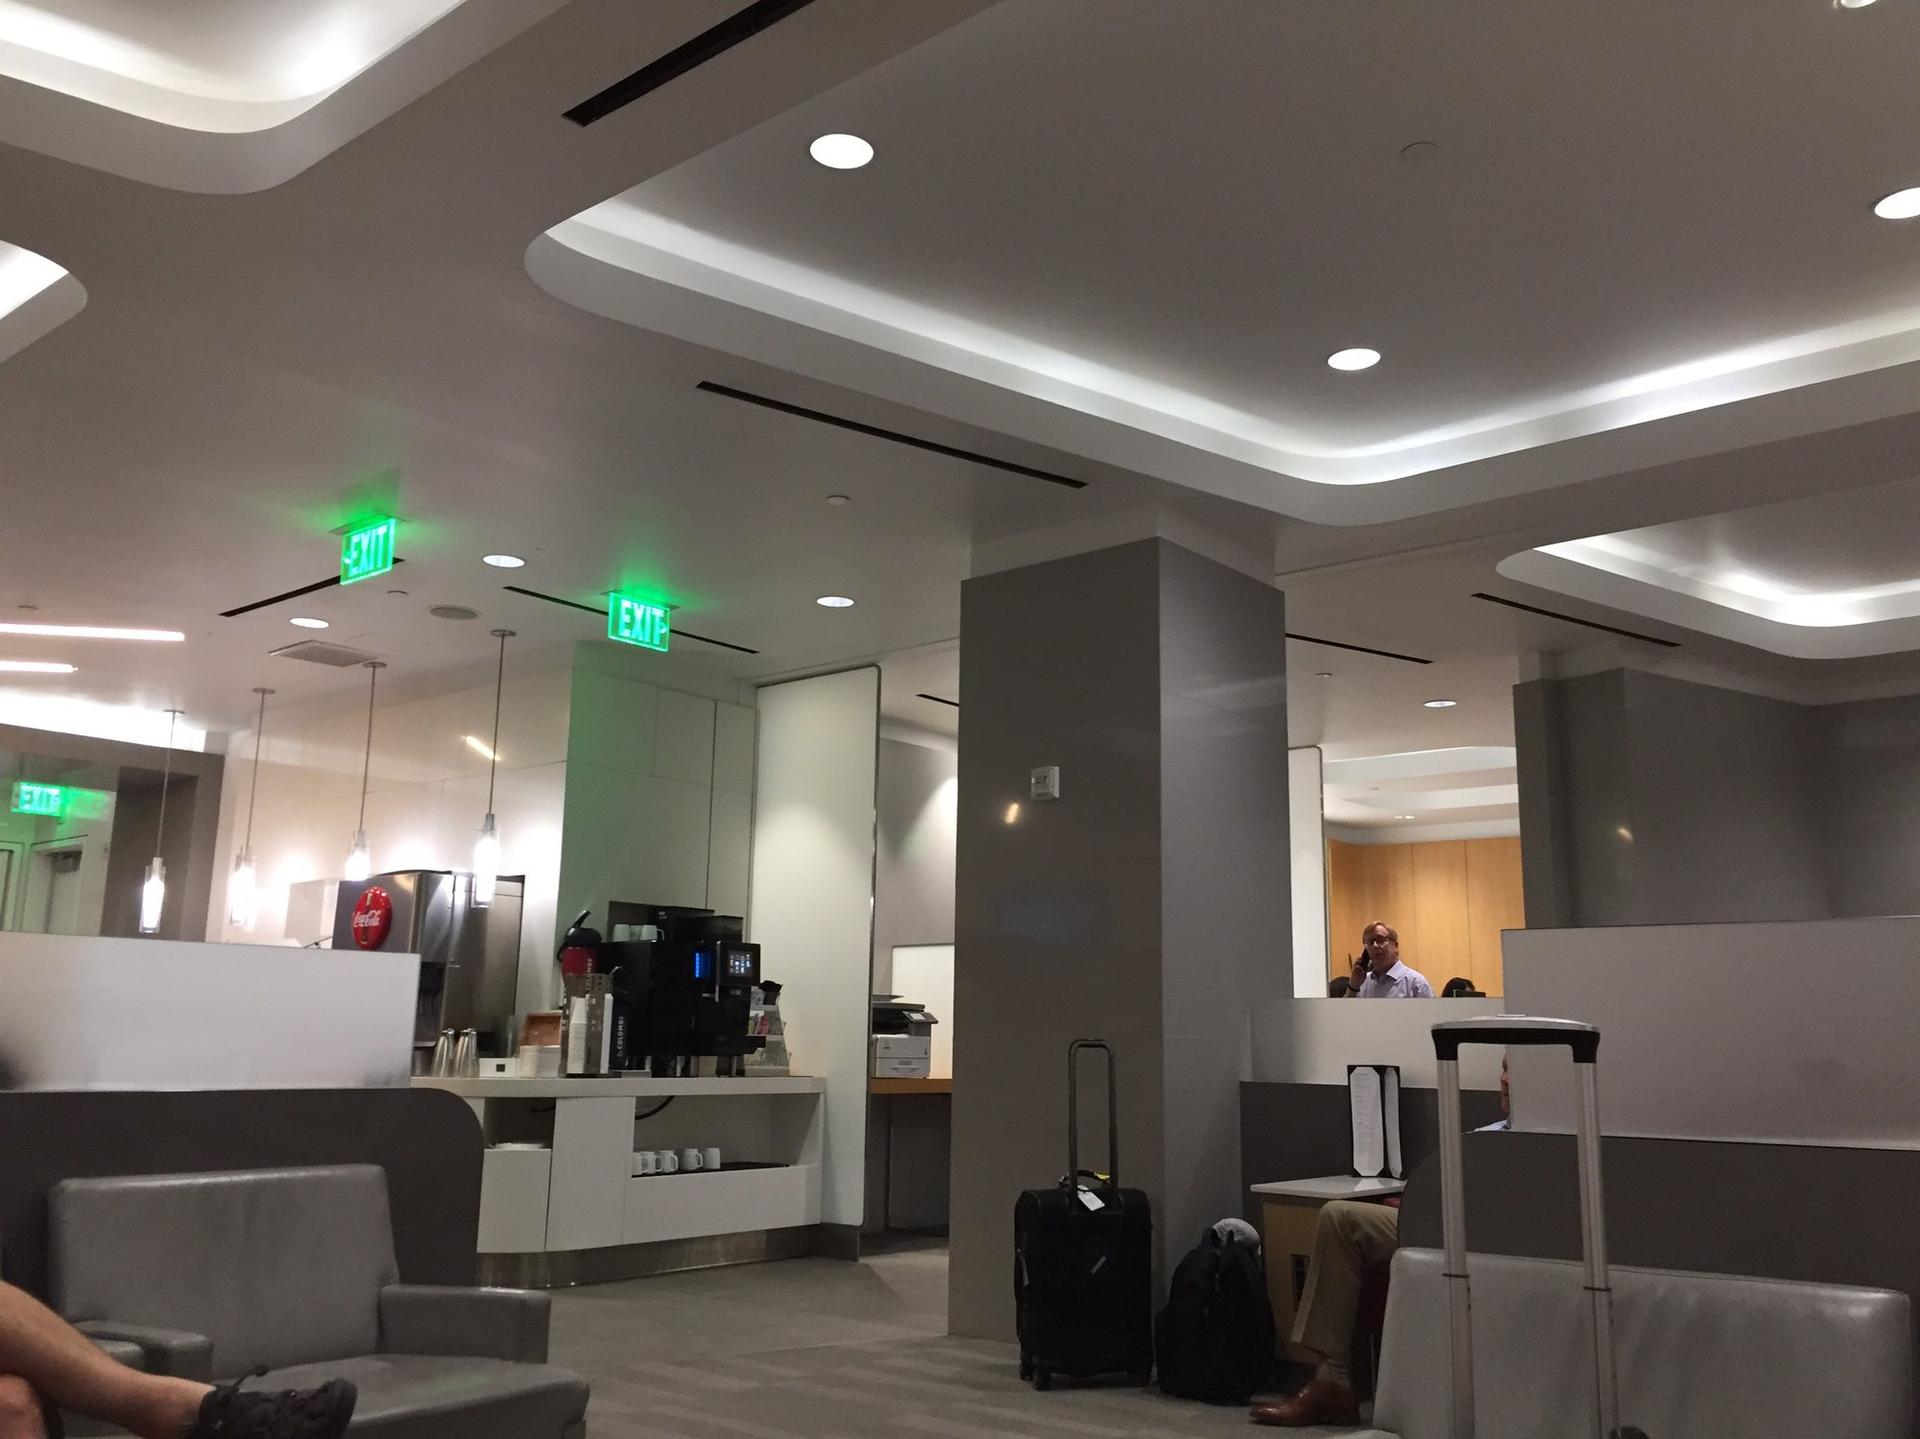 American Airlines Admirals Club image 31 of 43